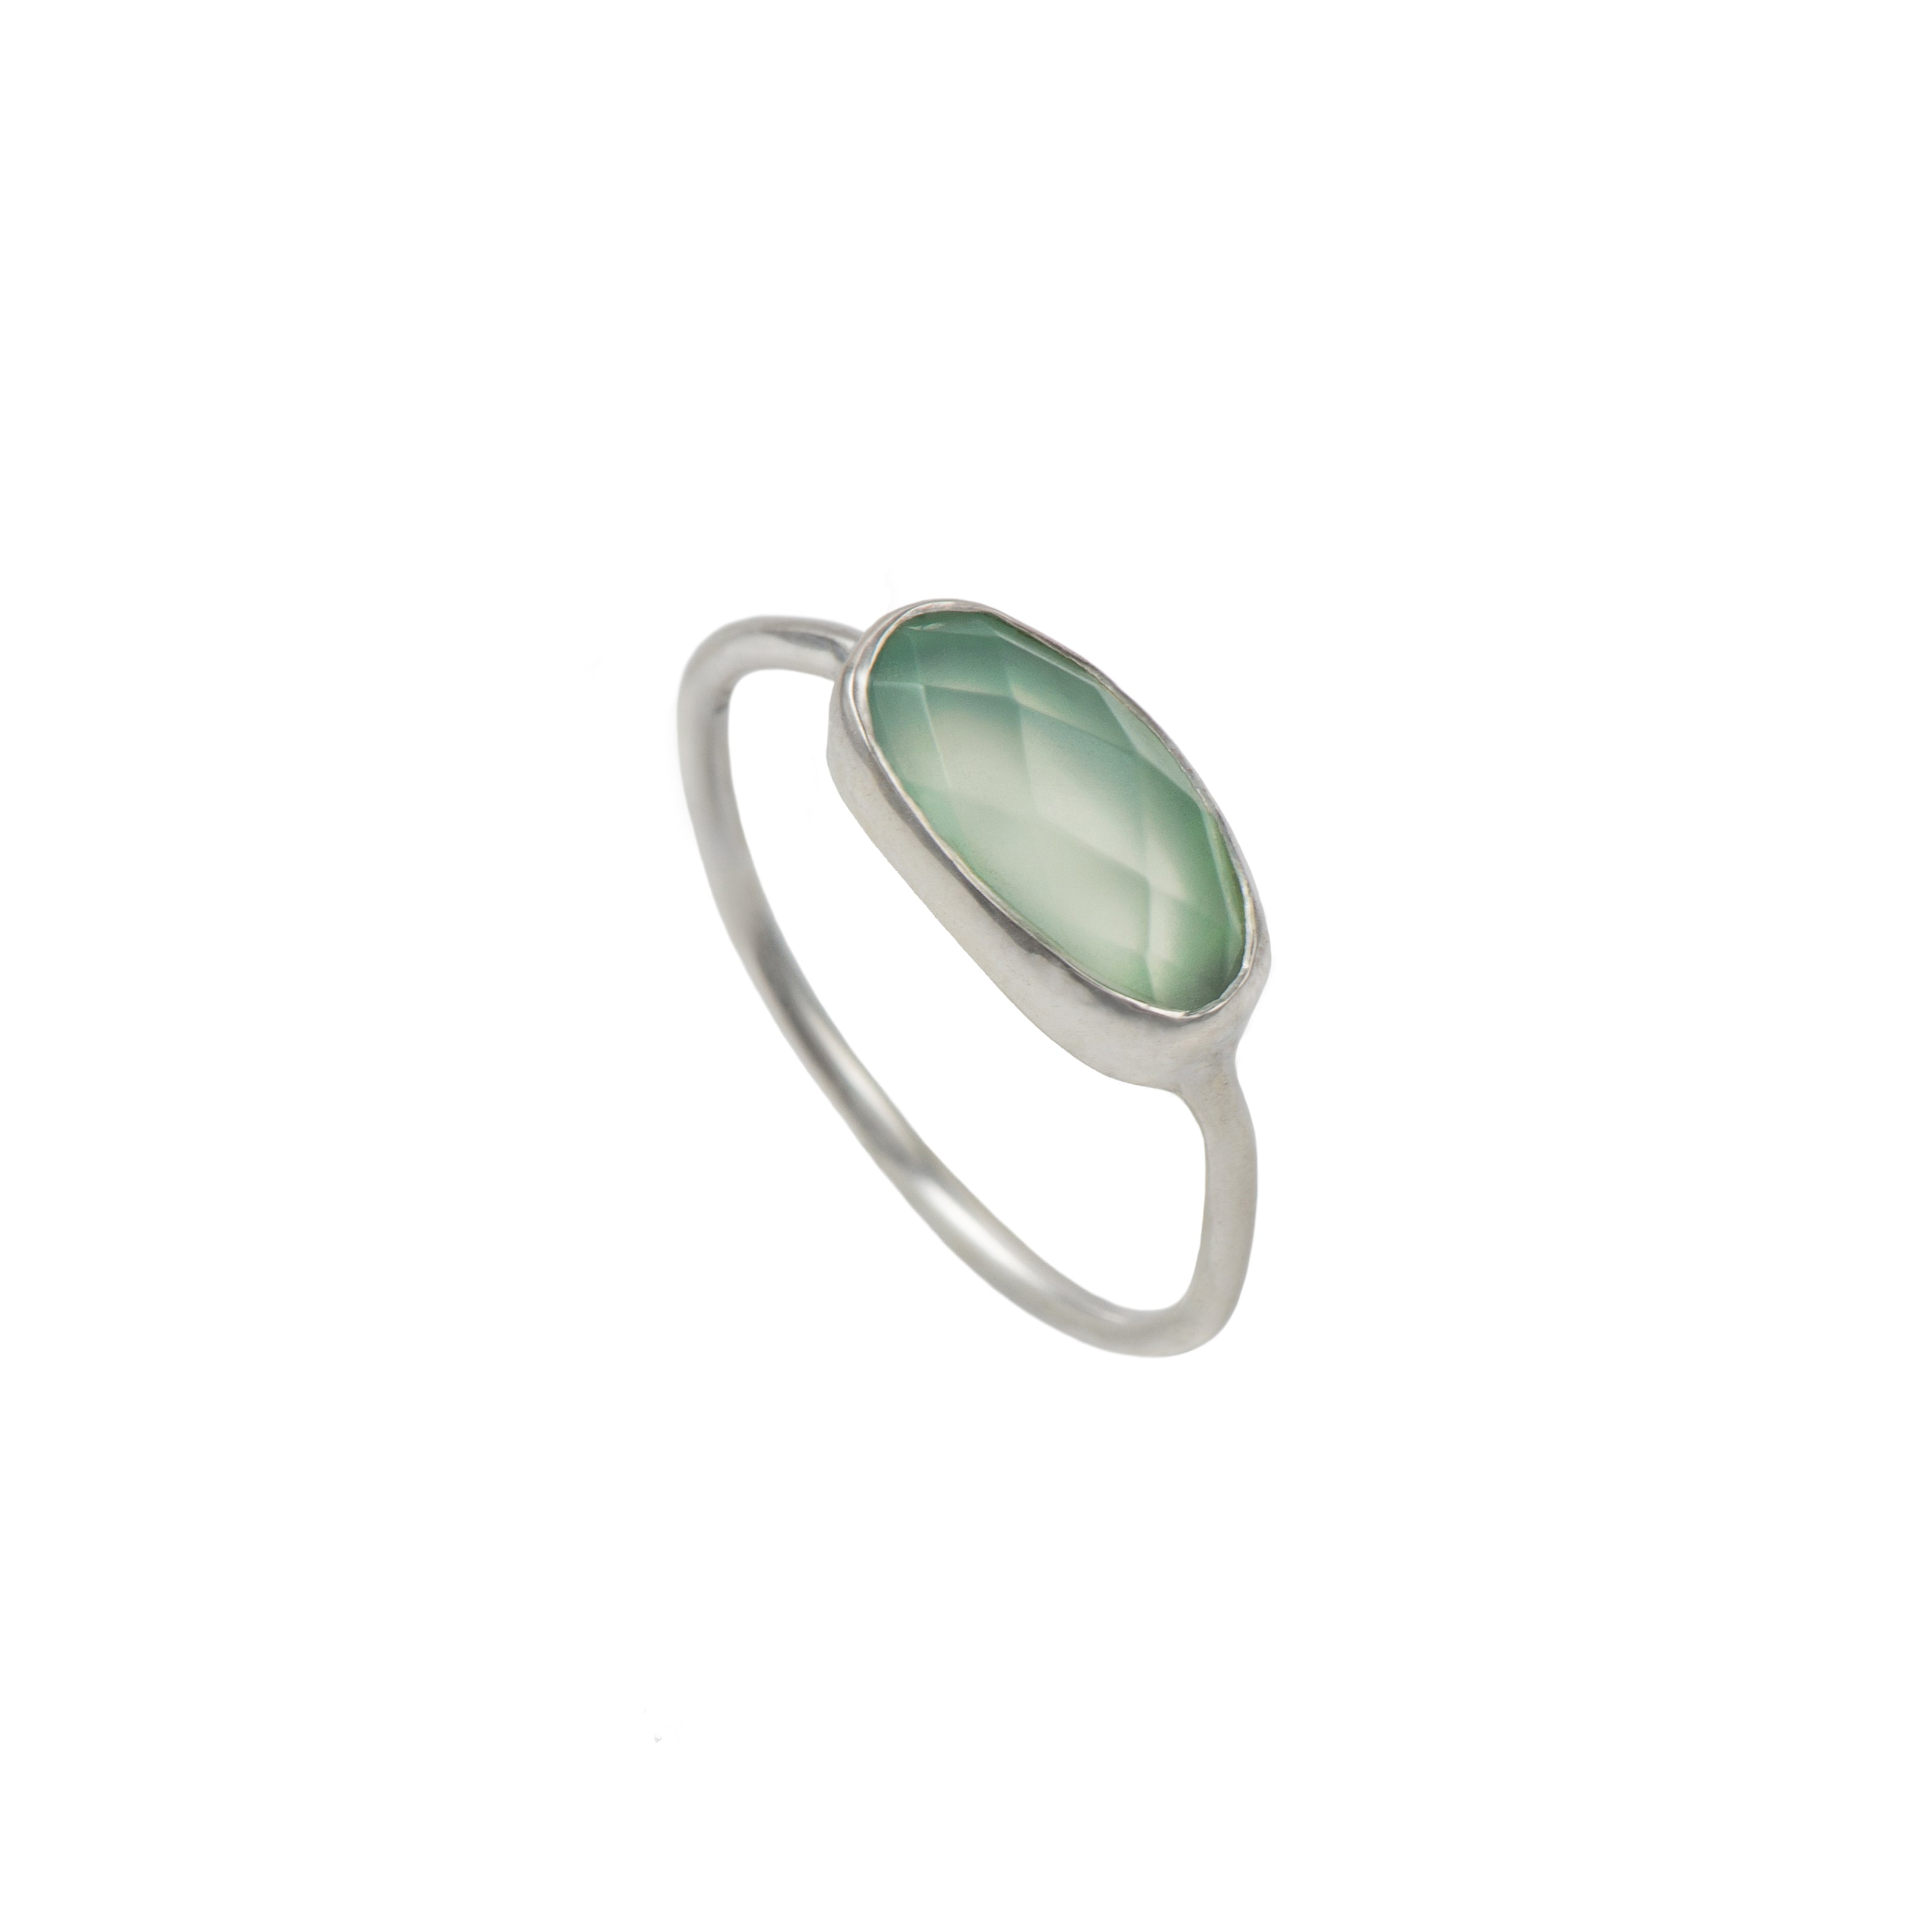 Faceted Oval Cut Natural Gemstone Sterling Silver Fine Band Ring - Aqua Chalcedony